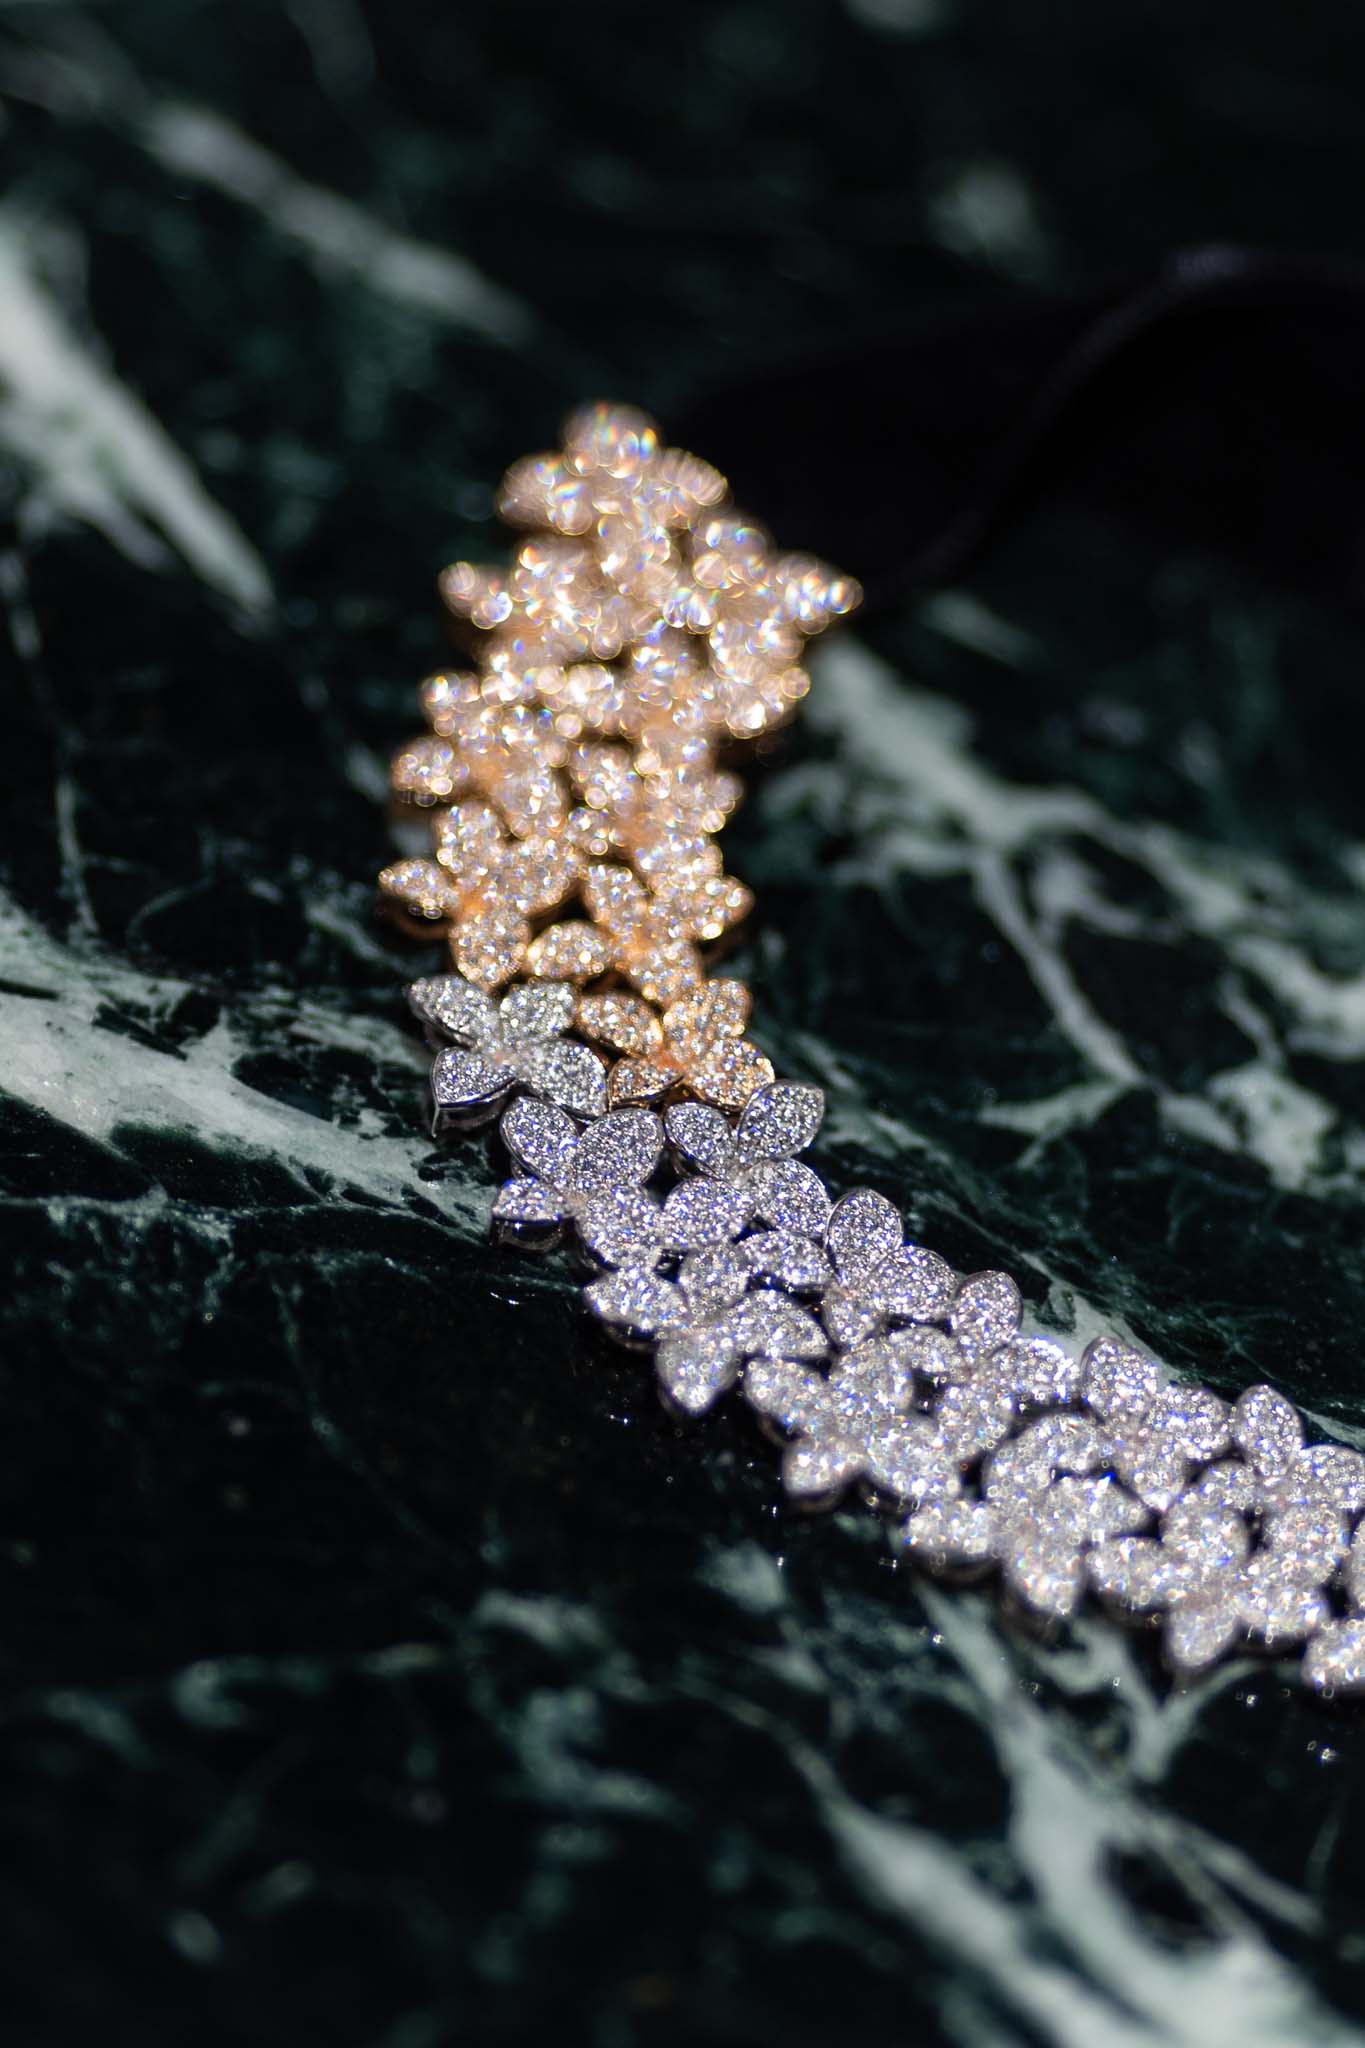 New year gift of high jewelry